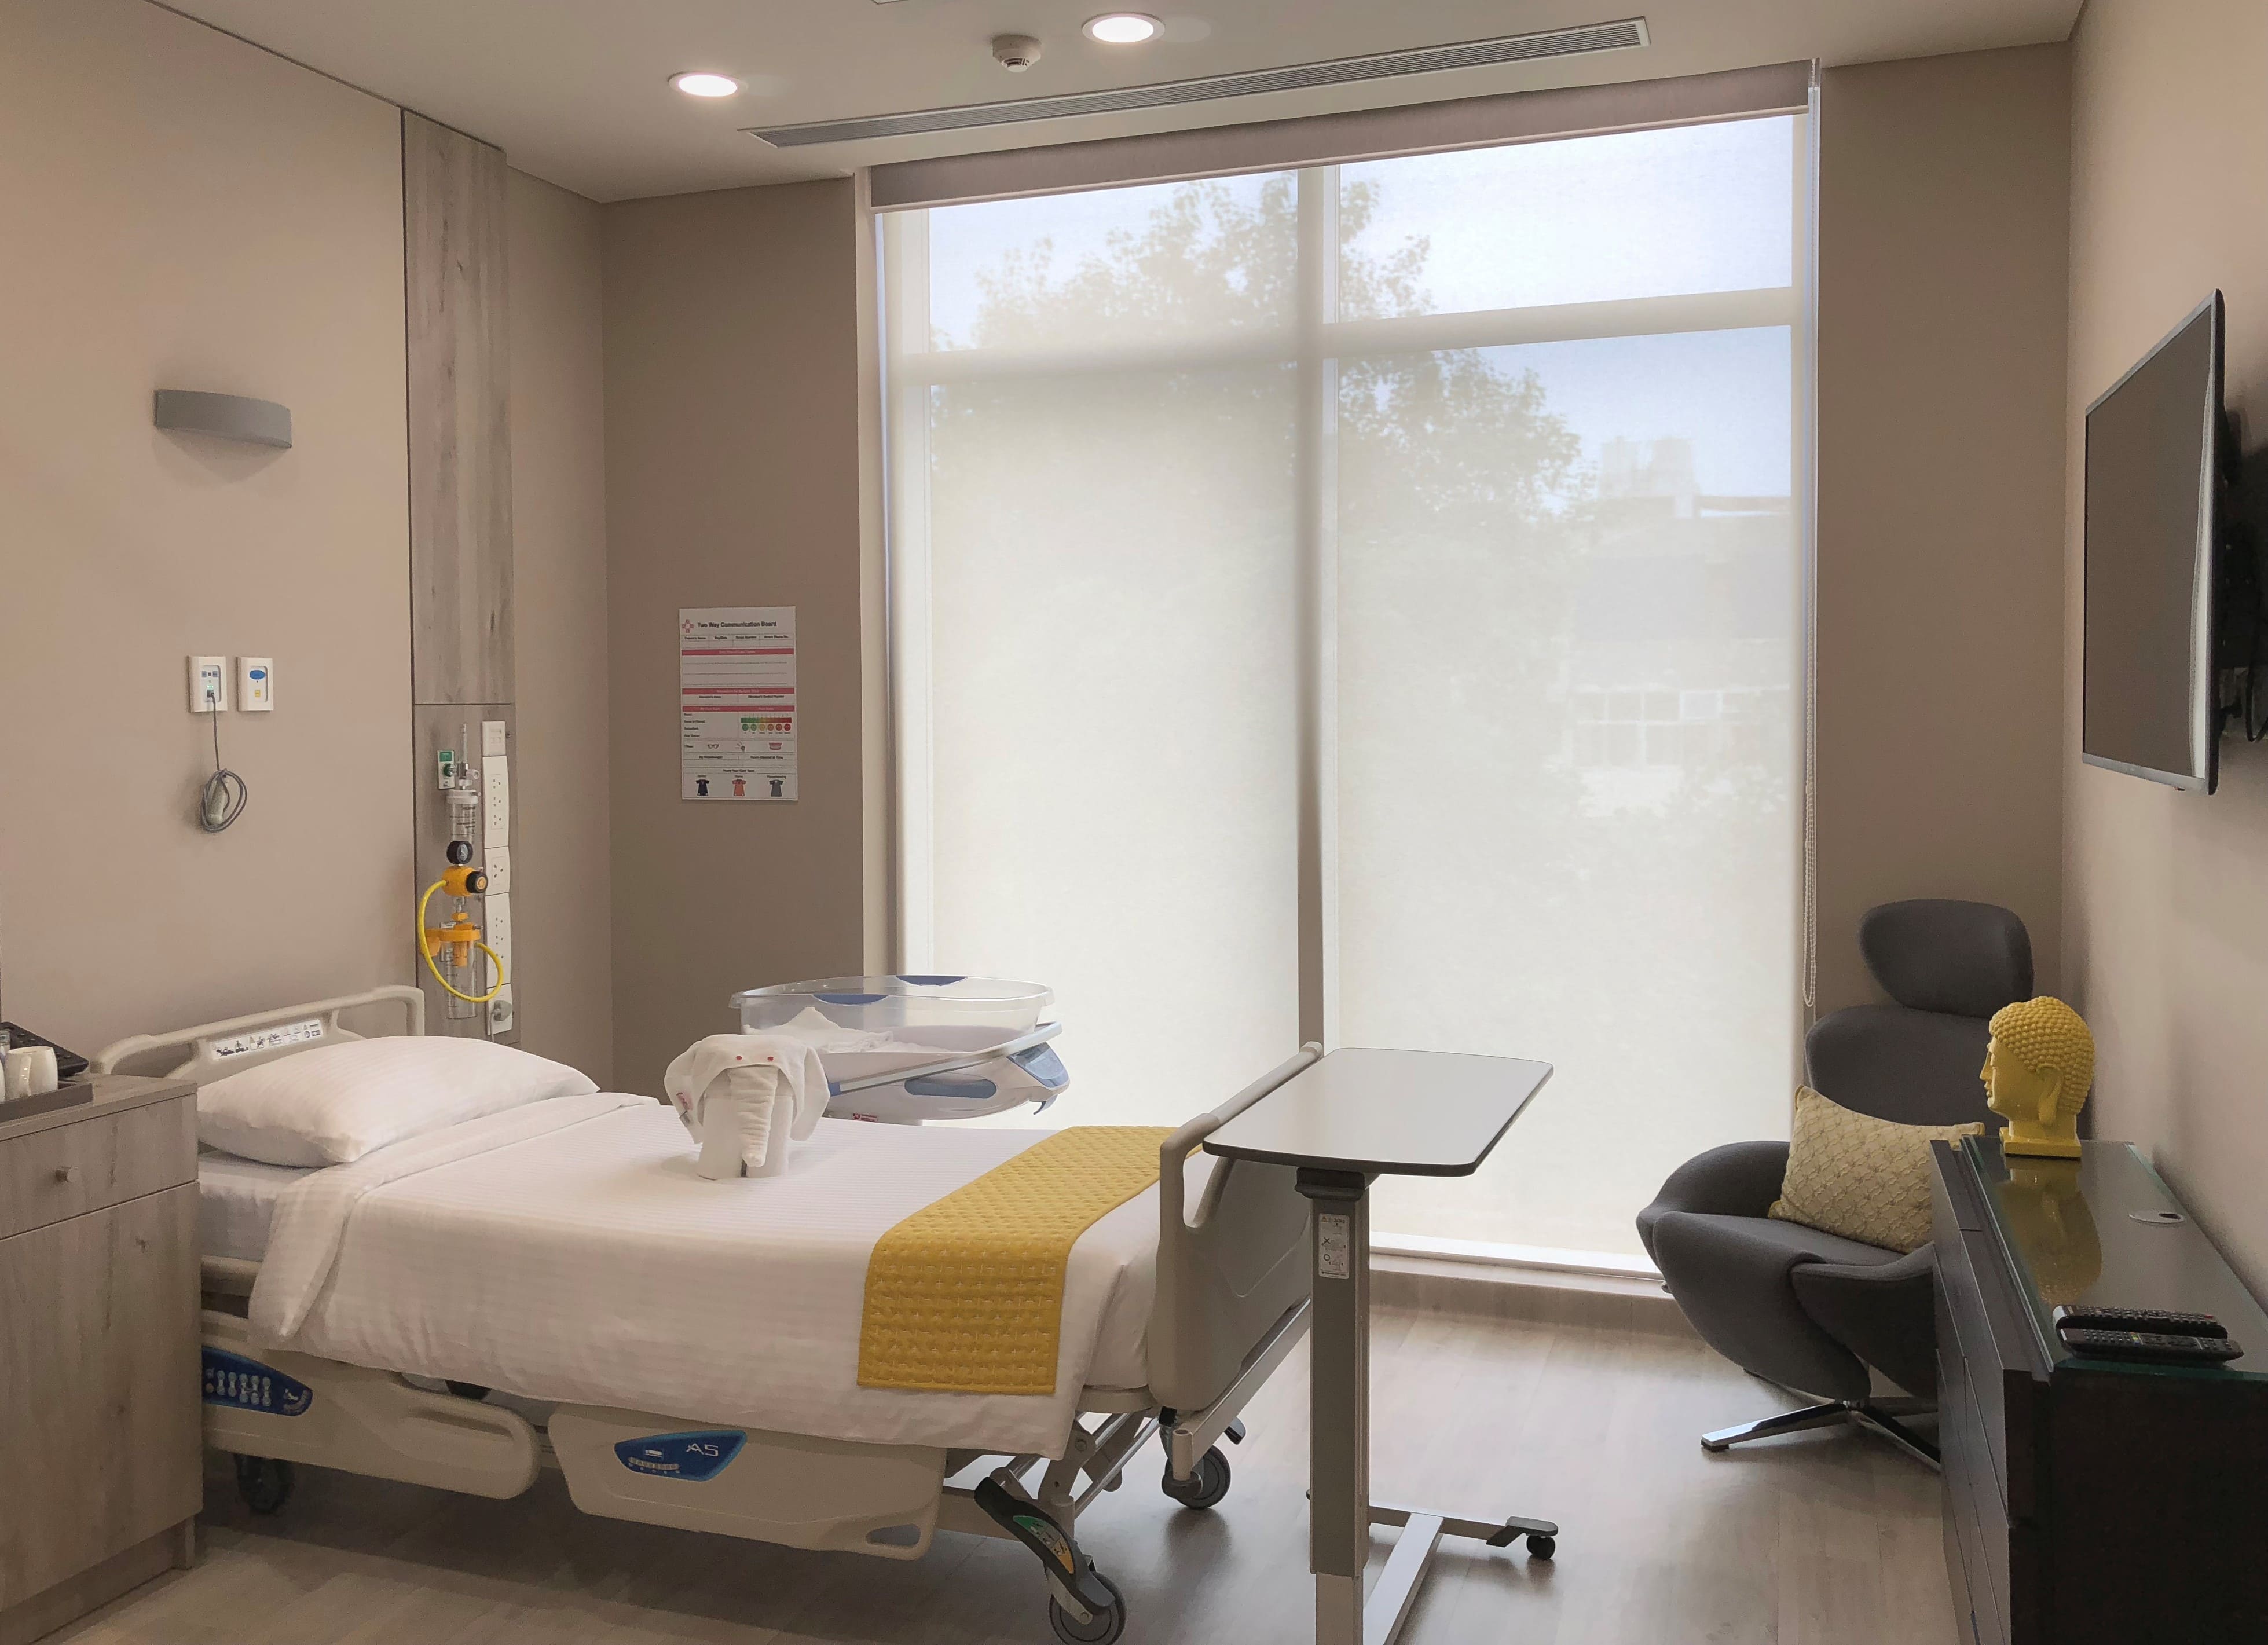 patient room with bed